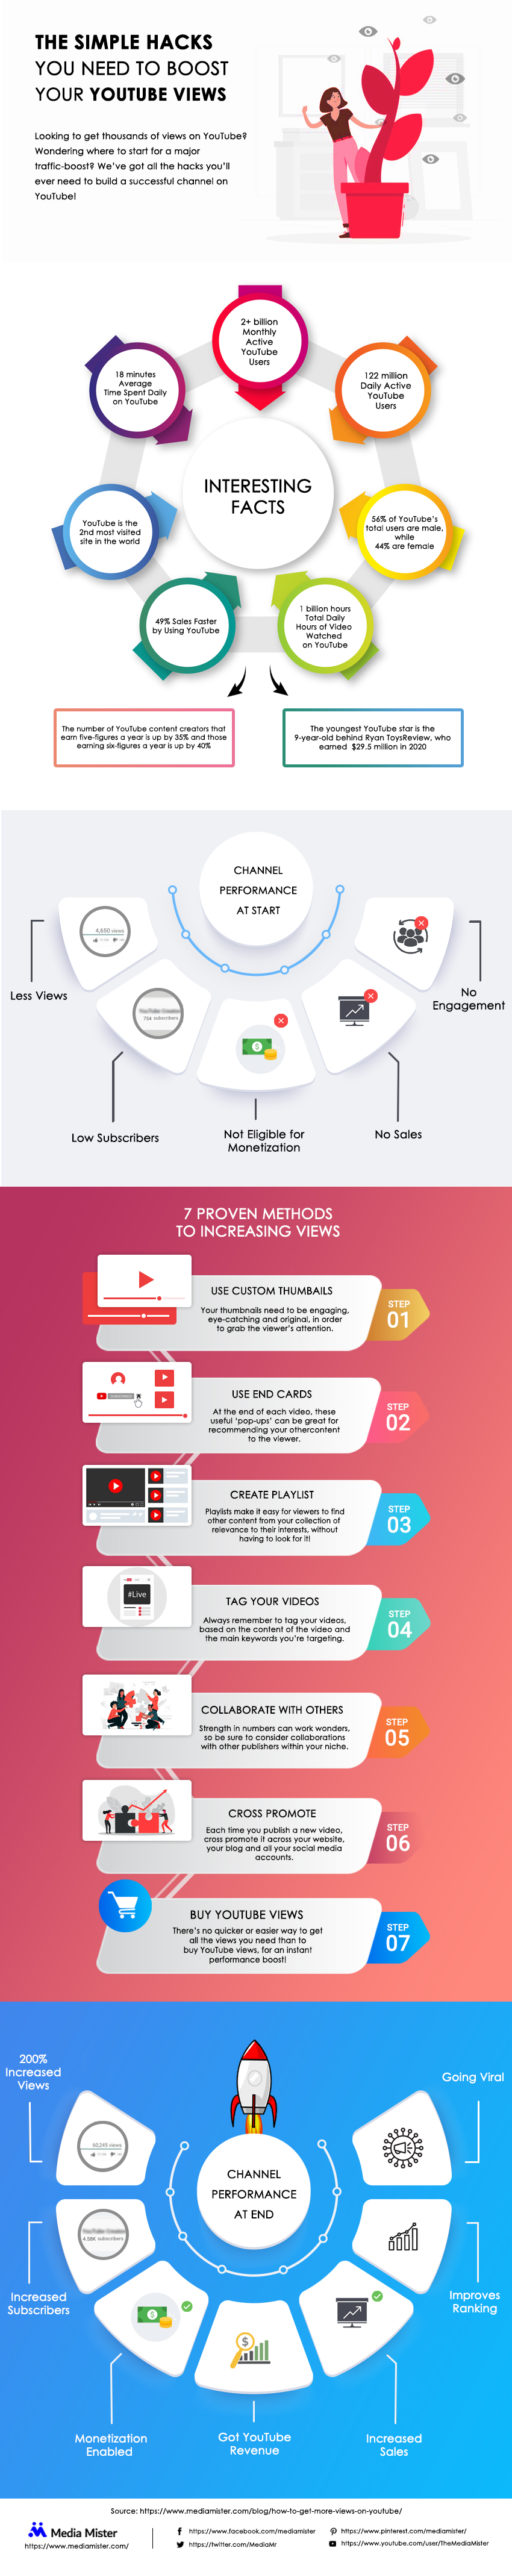 how to get views on youtube infographic